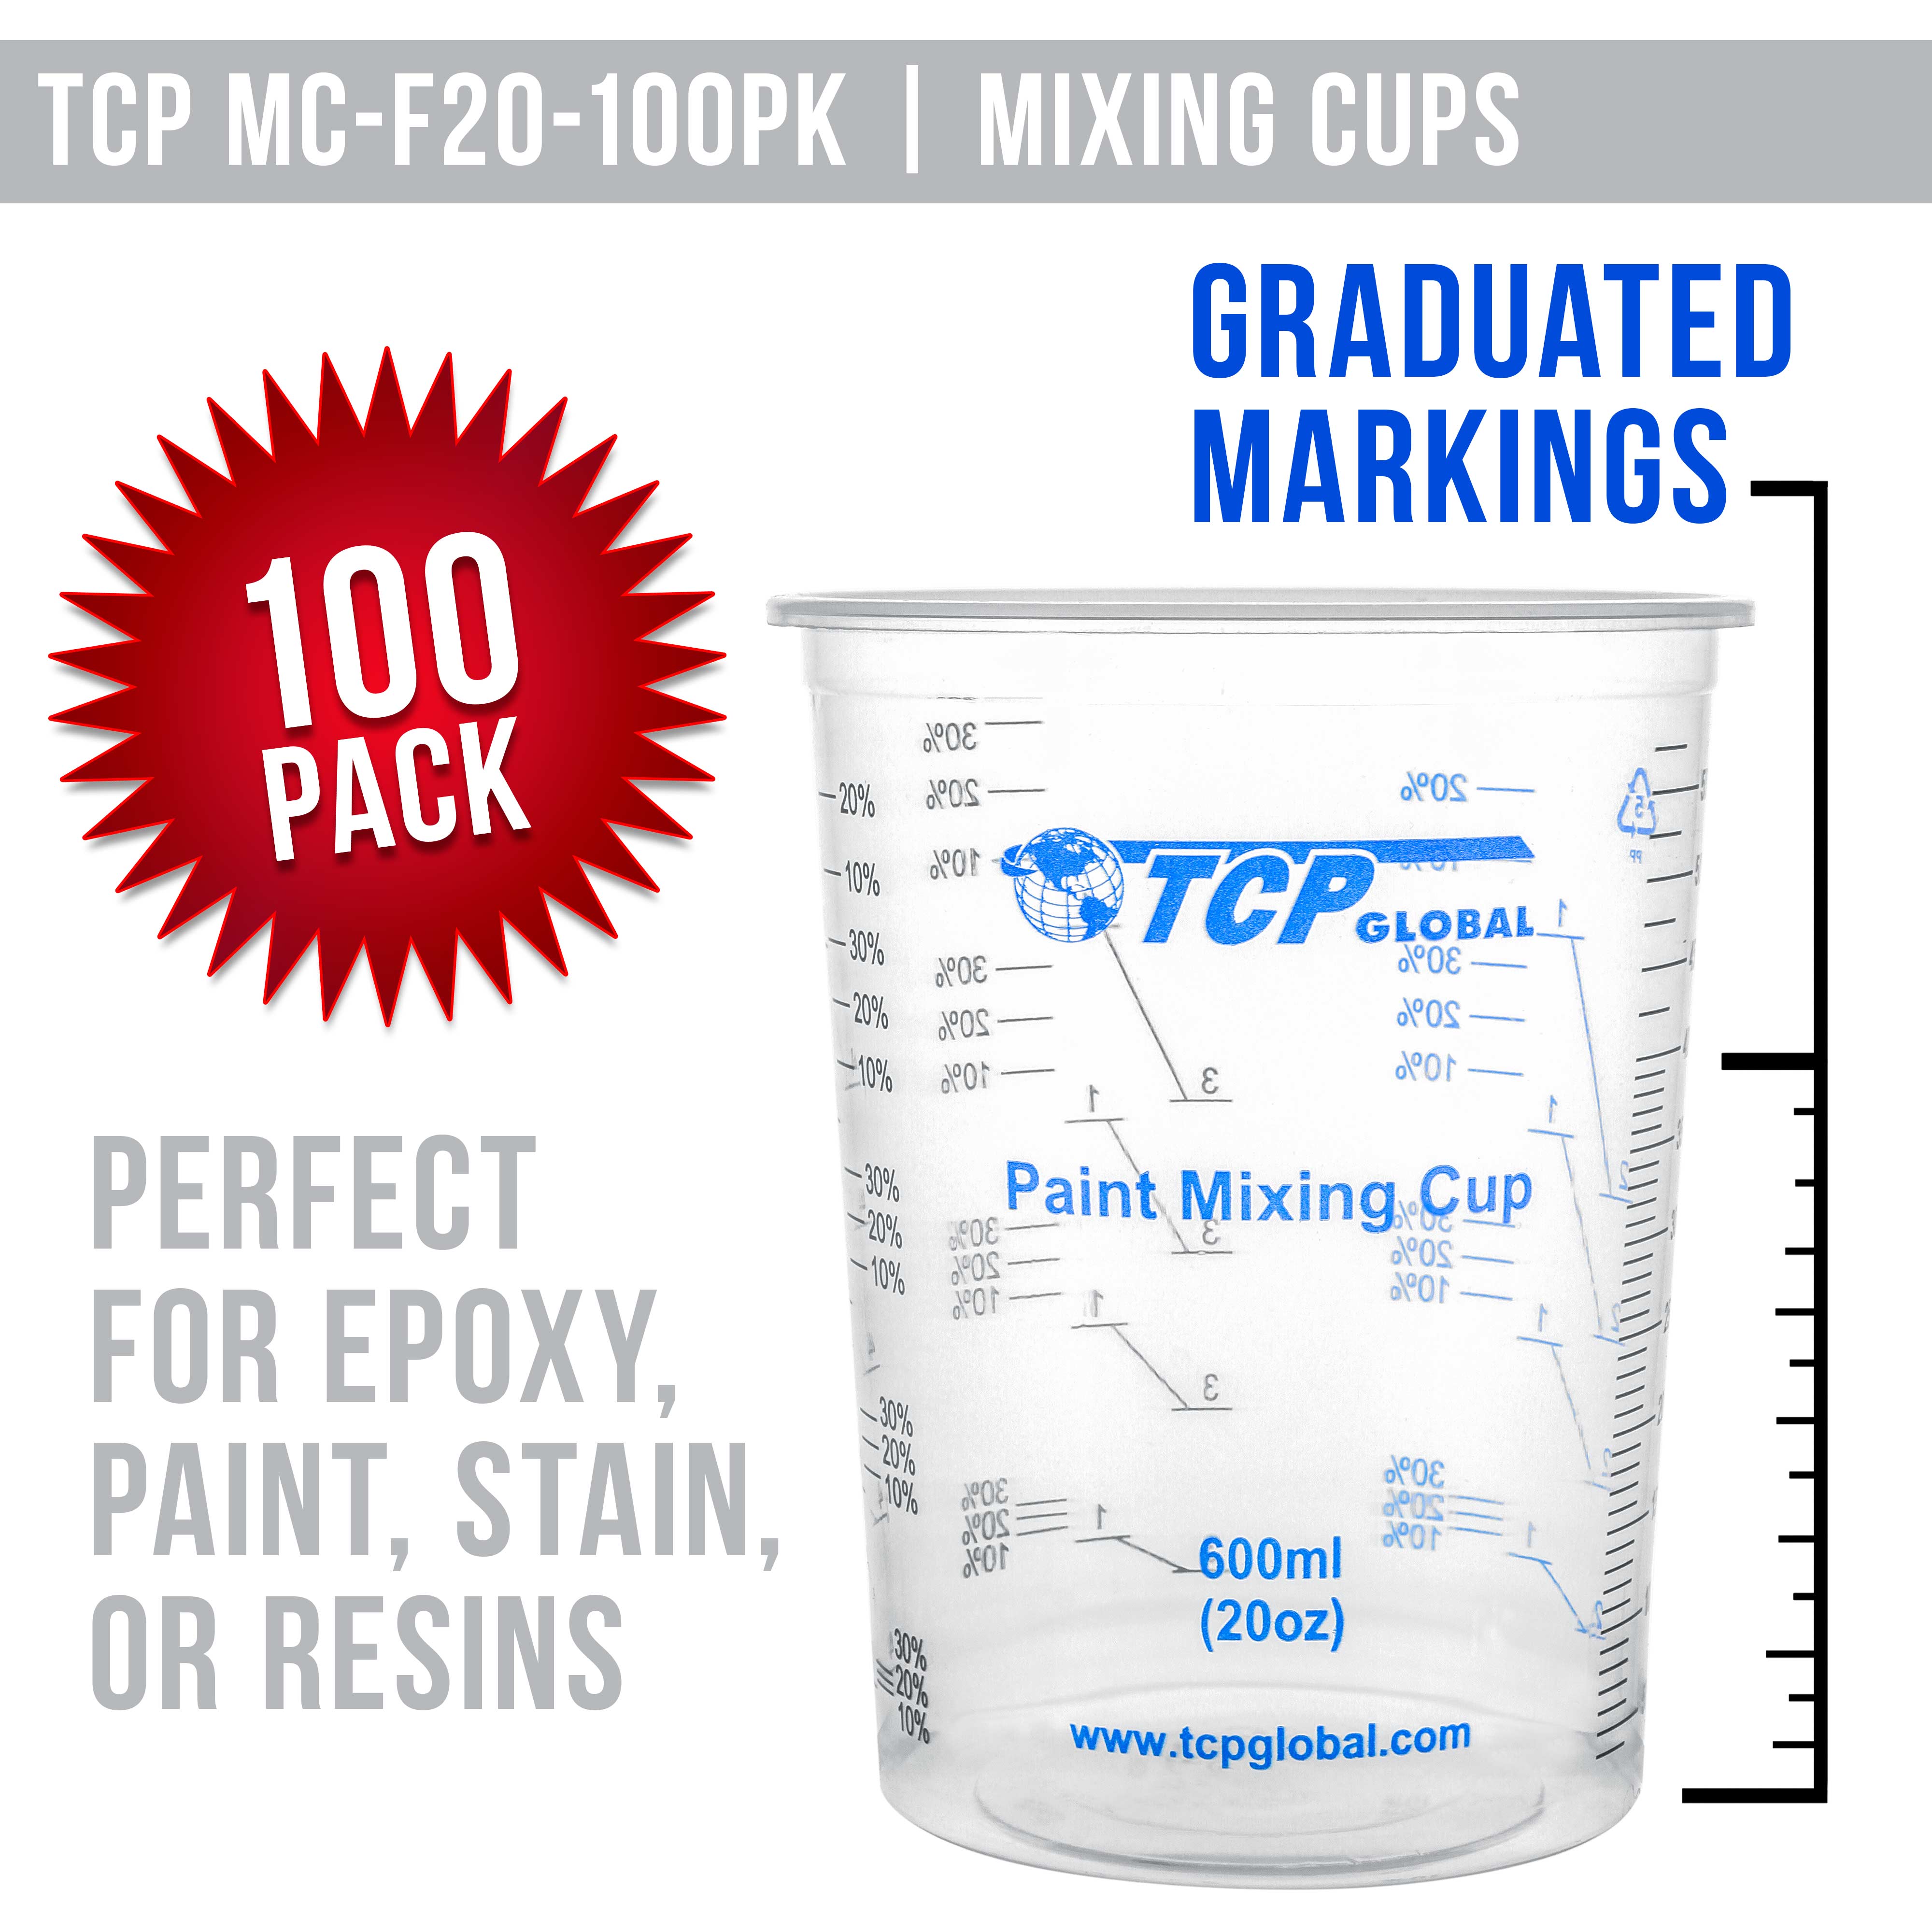 TCP Global 20 Ounce (600ml) Disposable Flexible Clear Graduated Plastic Mixing Cups - Box of 100 Cups & 50 Mixing Sticks - Use for Paint, Resin, Epoxy, Art, Kitchen - Measuring Ratios 2-1, 3-1, 4-1 ML - image 2 of 6